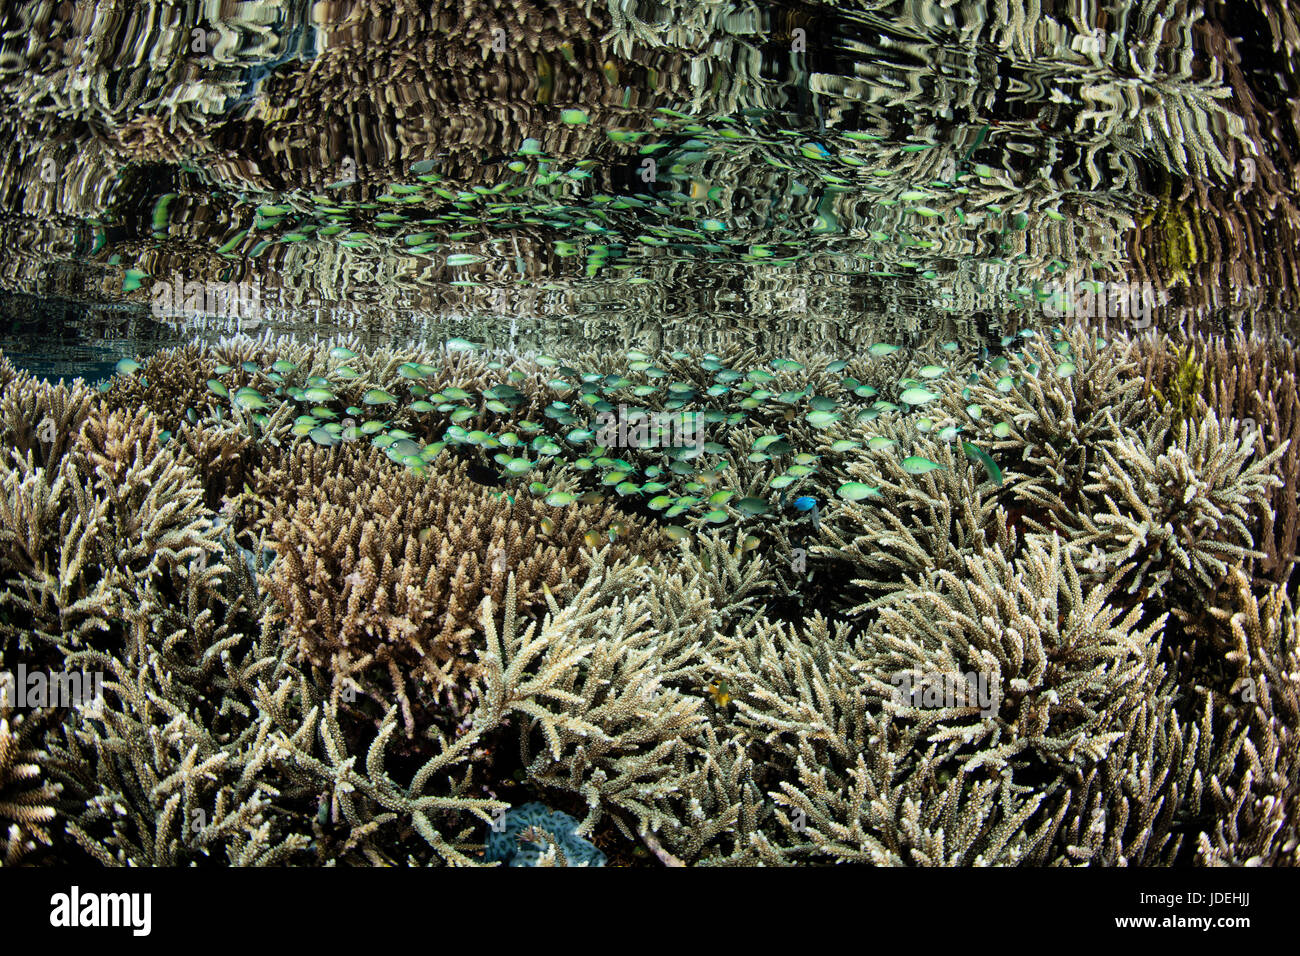 Various Corals growing on Reef Top, Acropora, Komodo National Park, Indonesia Stock Photo